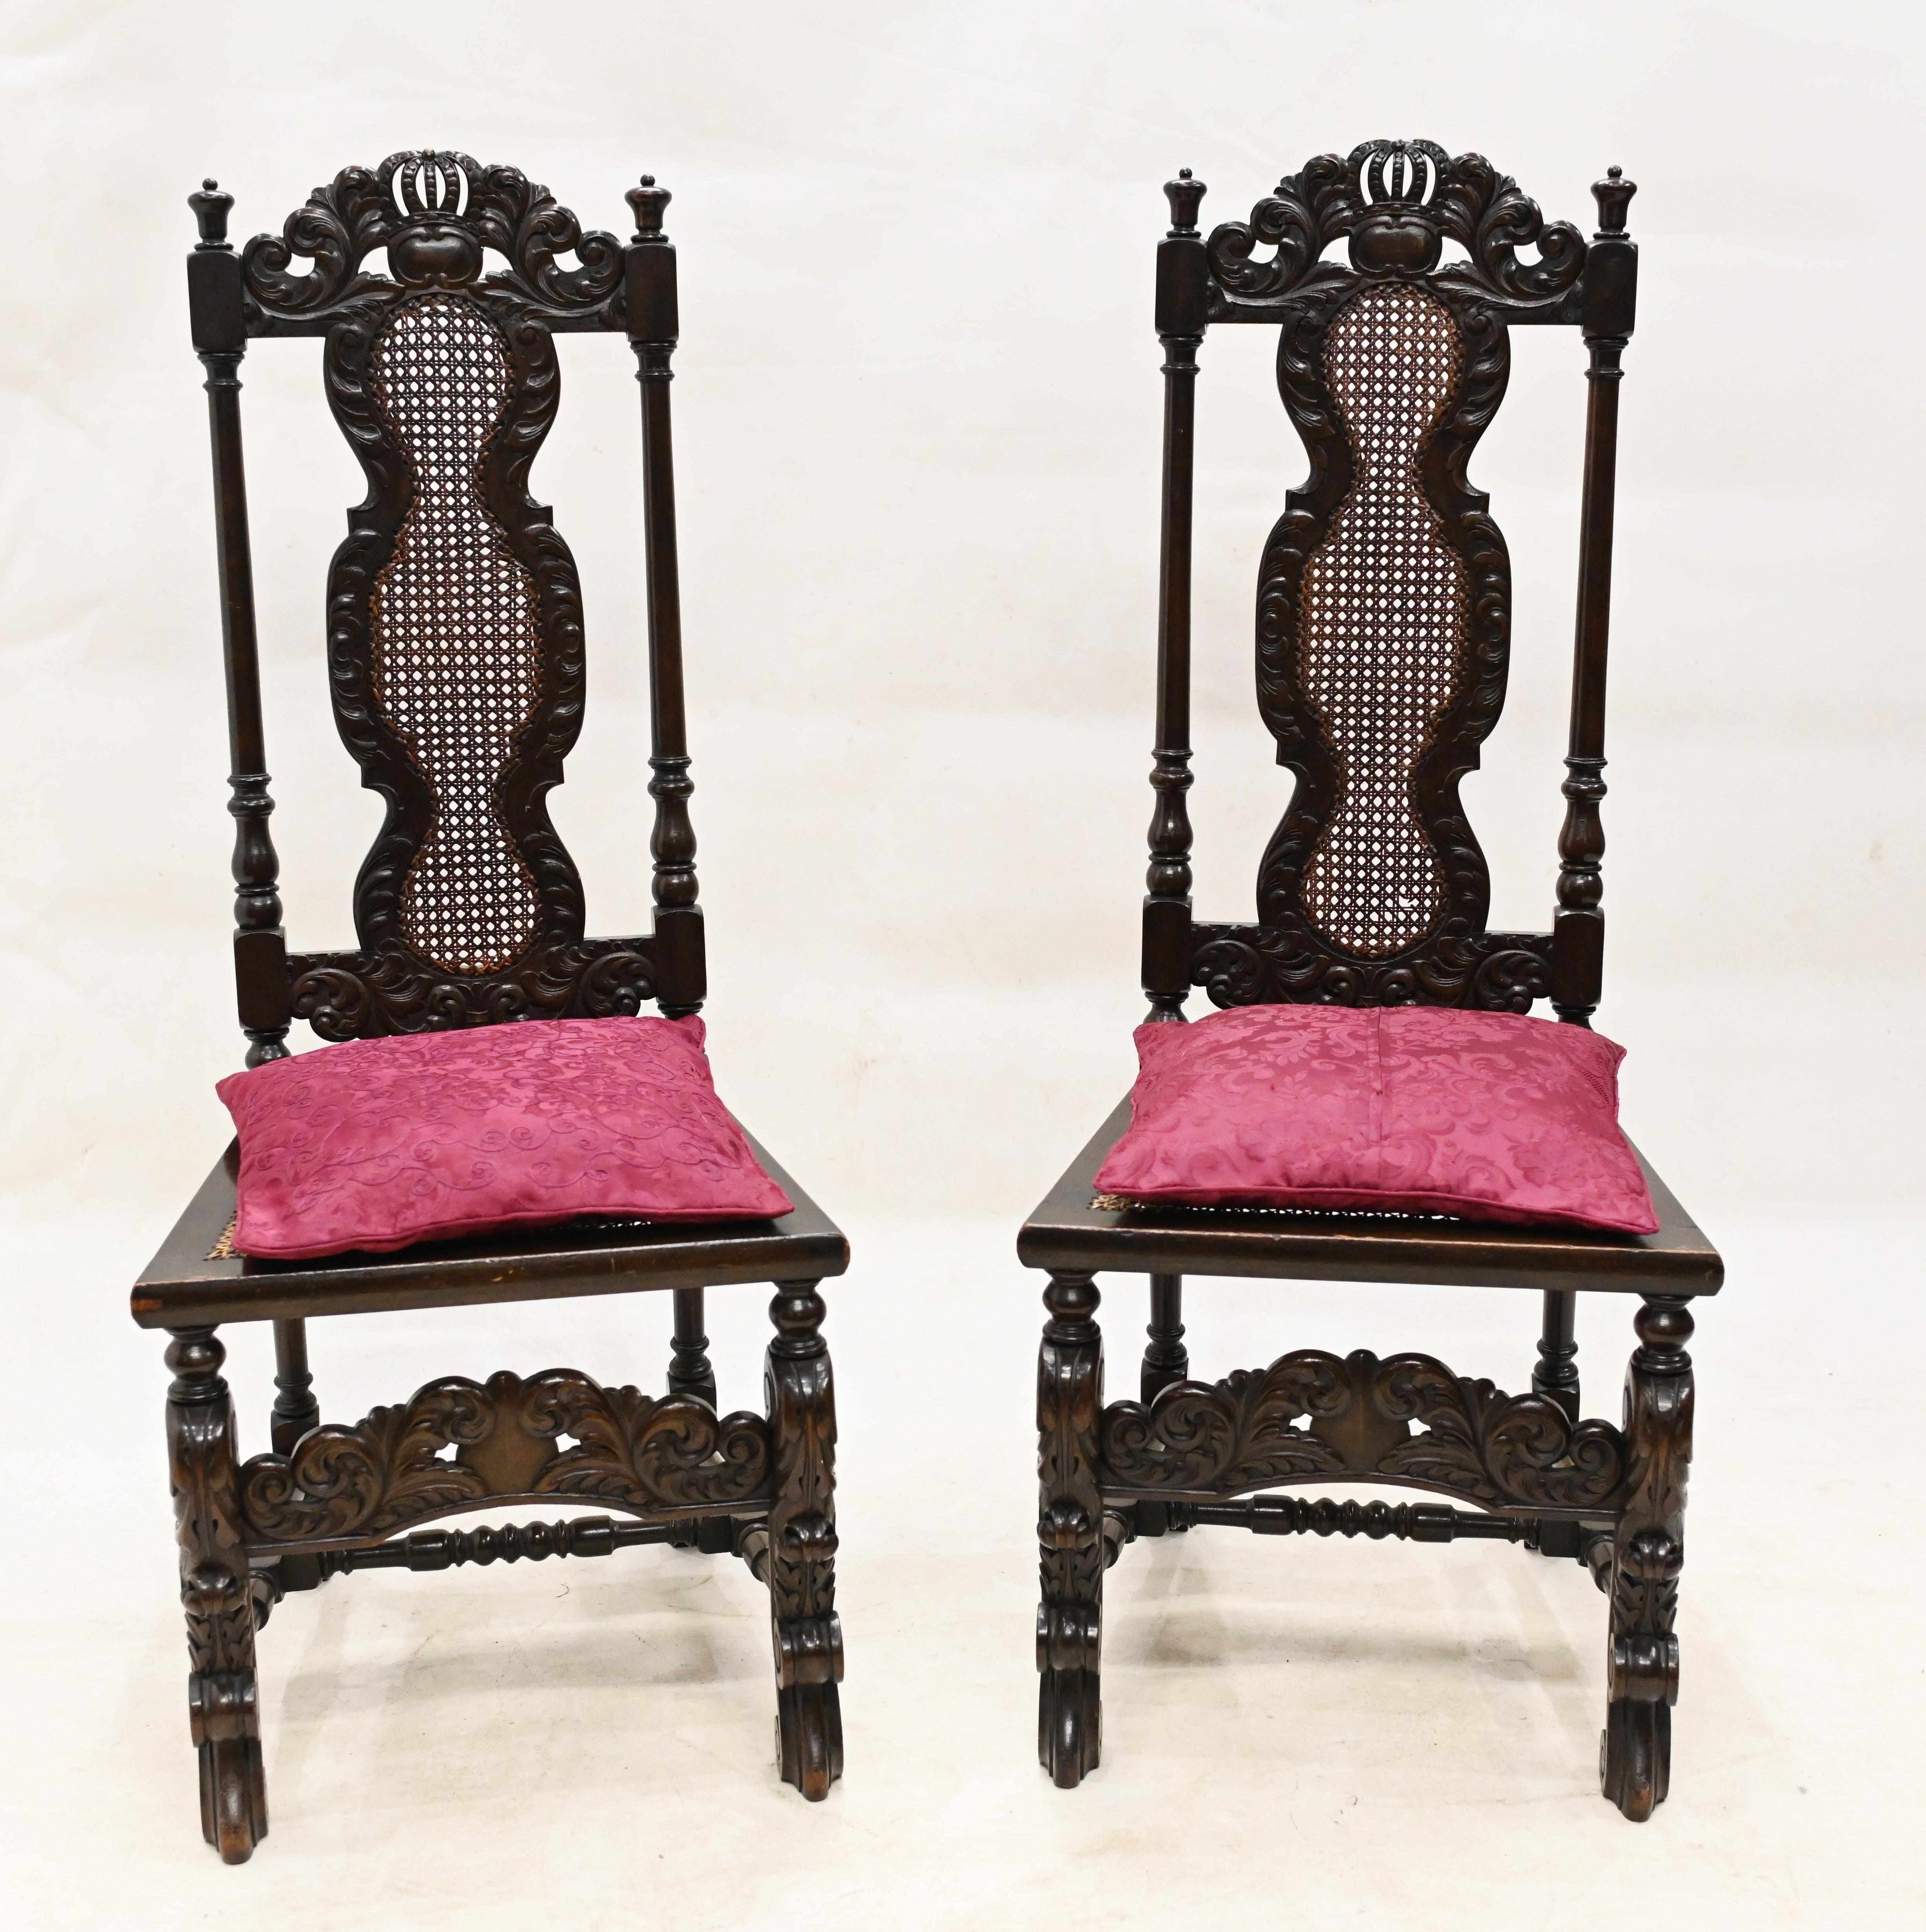 On trend pair of antique chairs in the Carolean manner
We date this pair to circa 1880 and they have a great farmhouse look
Feature raffia seats 
Hand carved details are very intricate and ornate
Bought from a private residence in London's